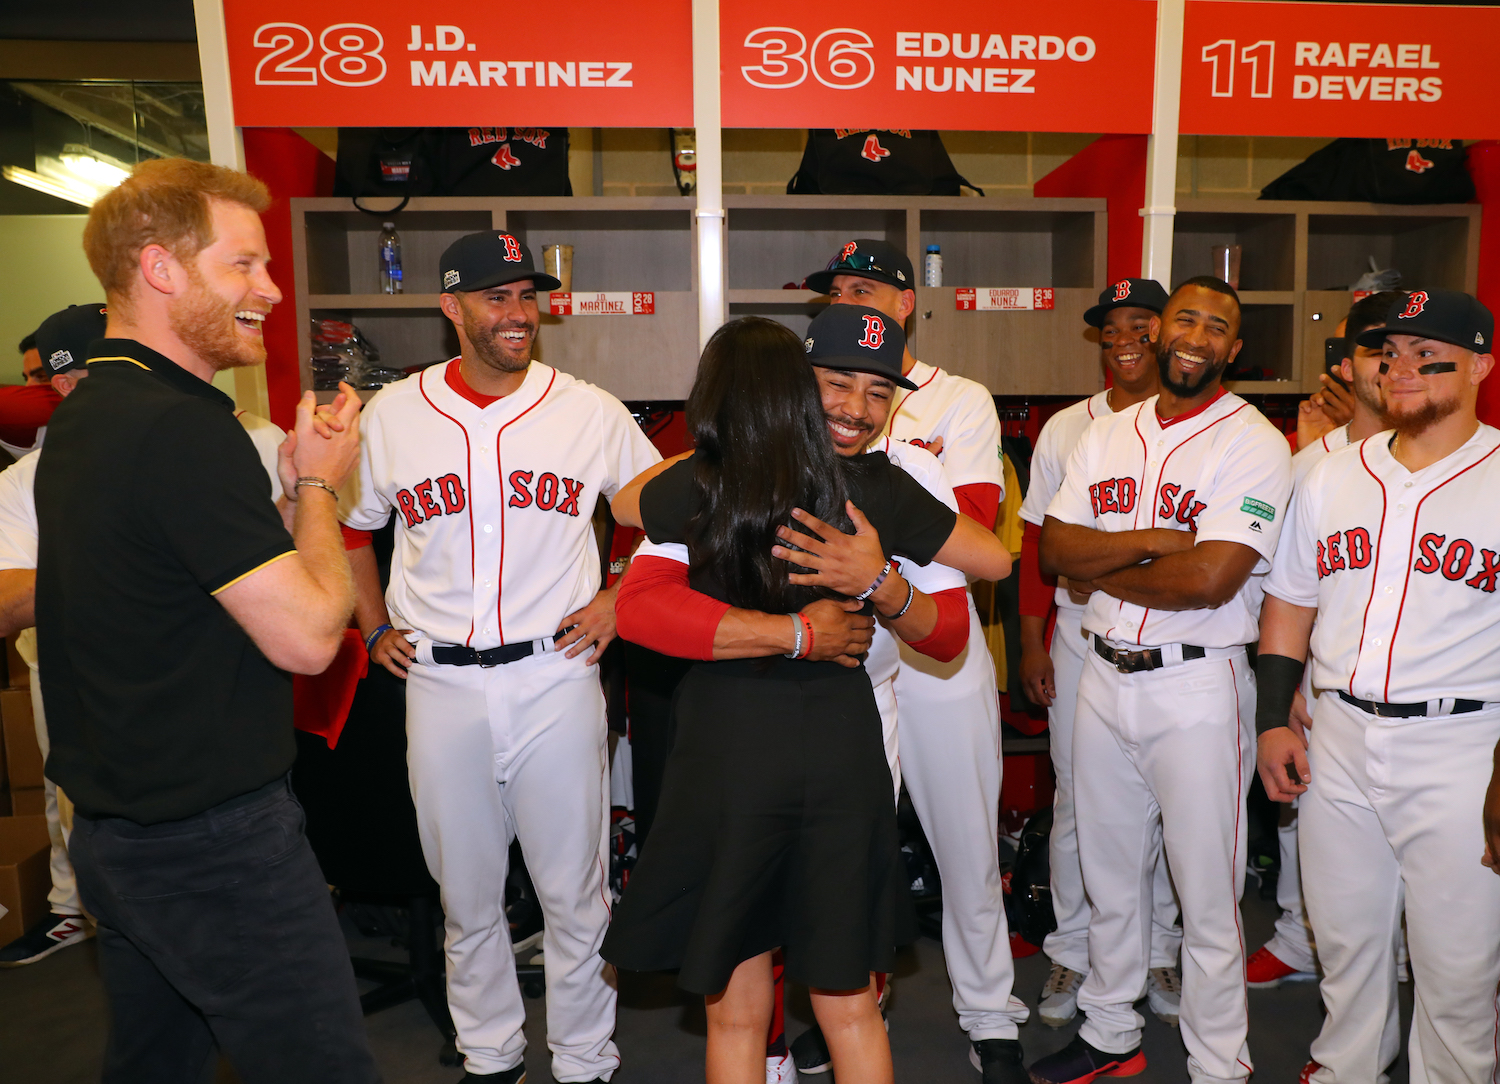 Meghan Markle greets distant relative Mookie Betts